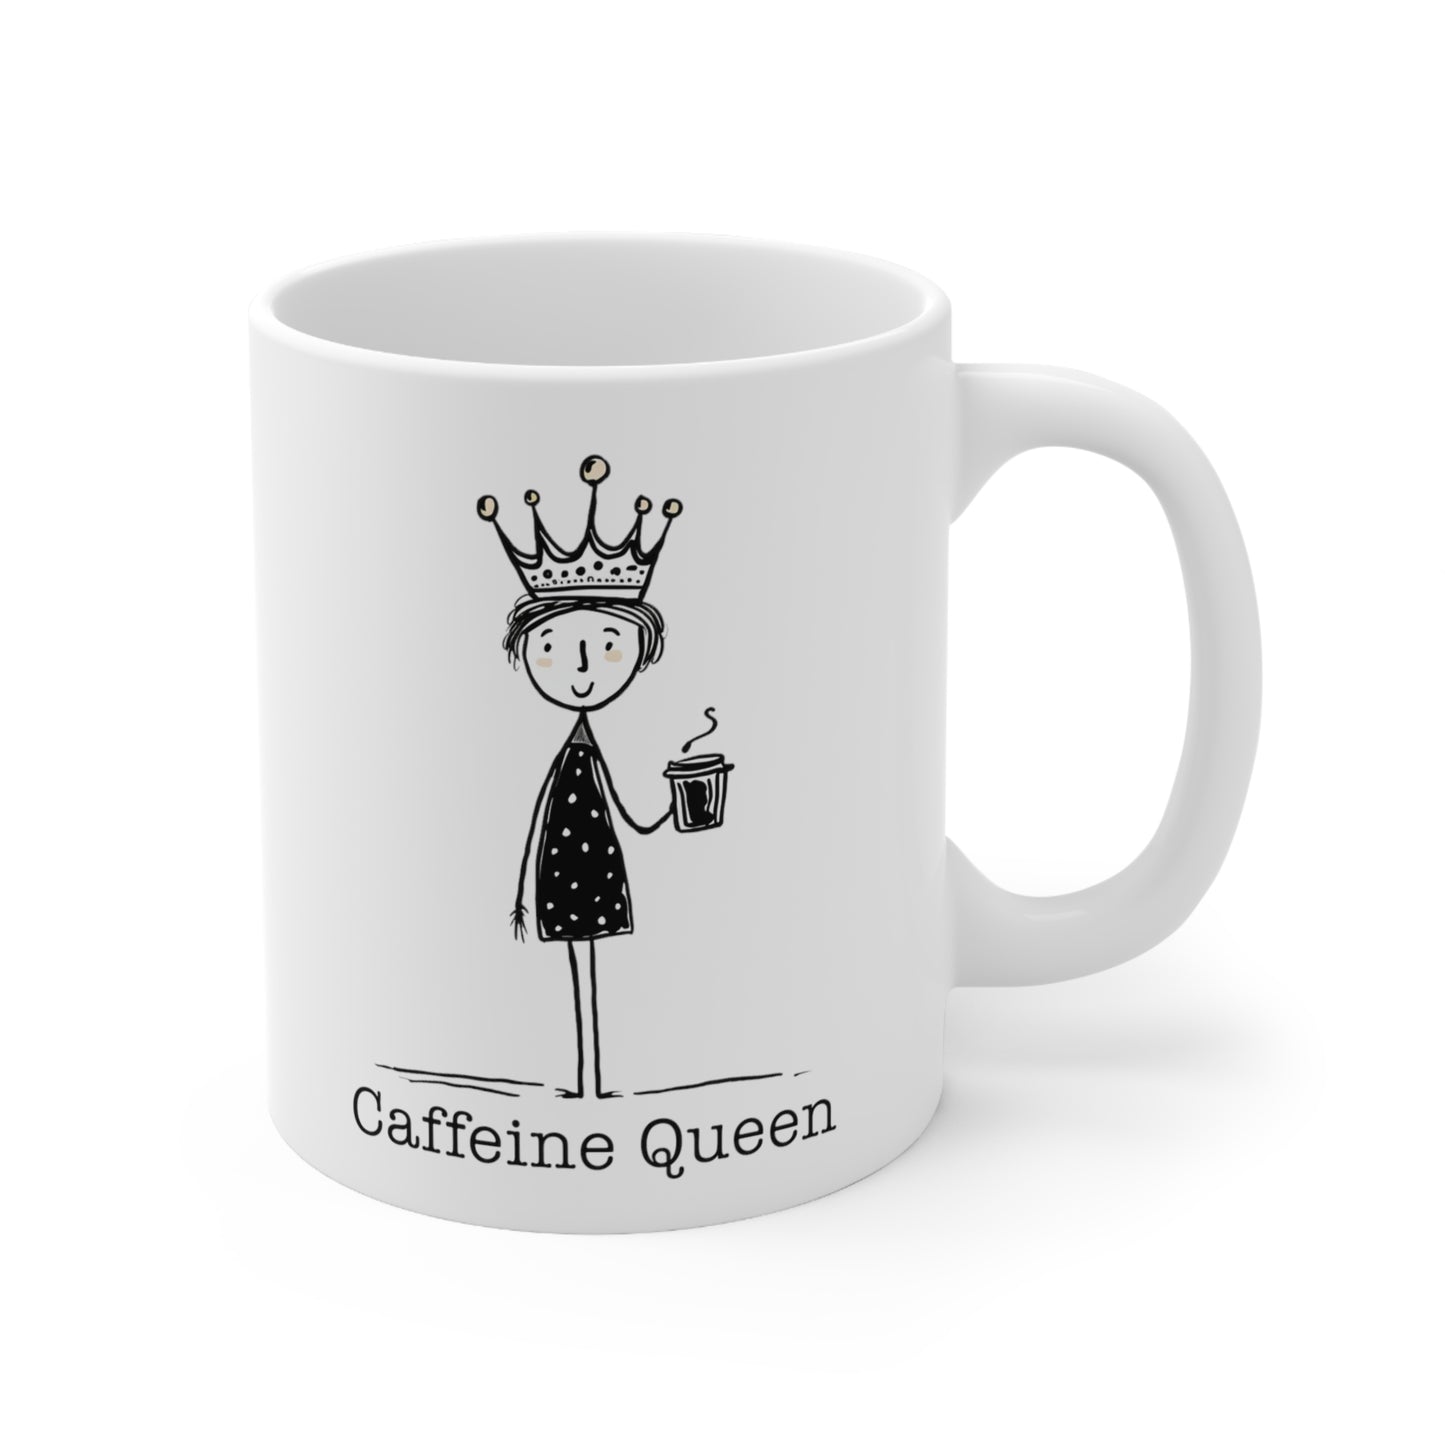 Caffeine Queen, the minimalistic start to any Queen's Morning!